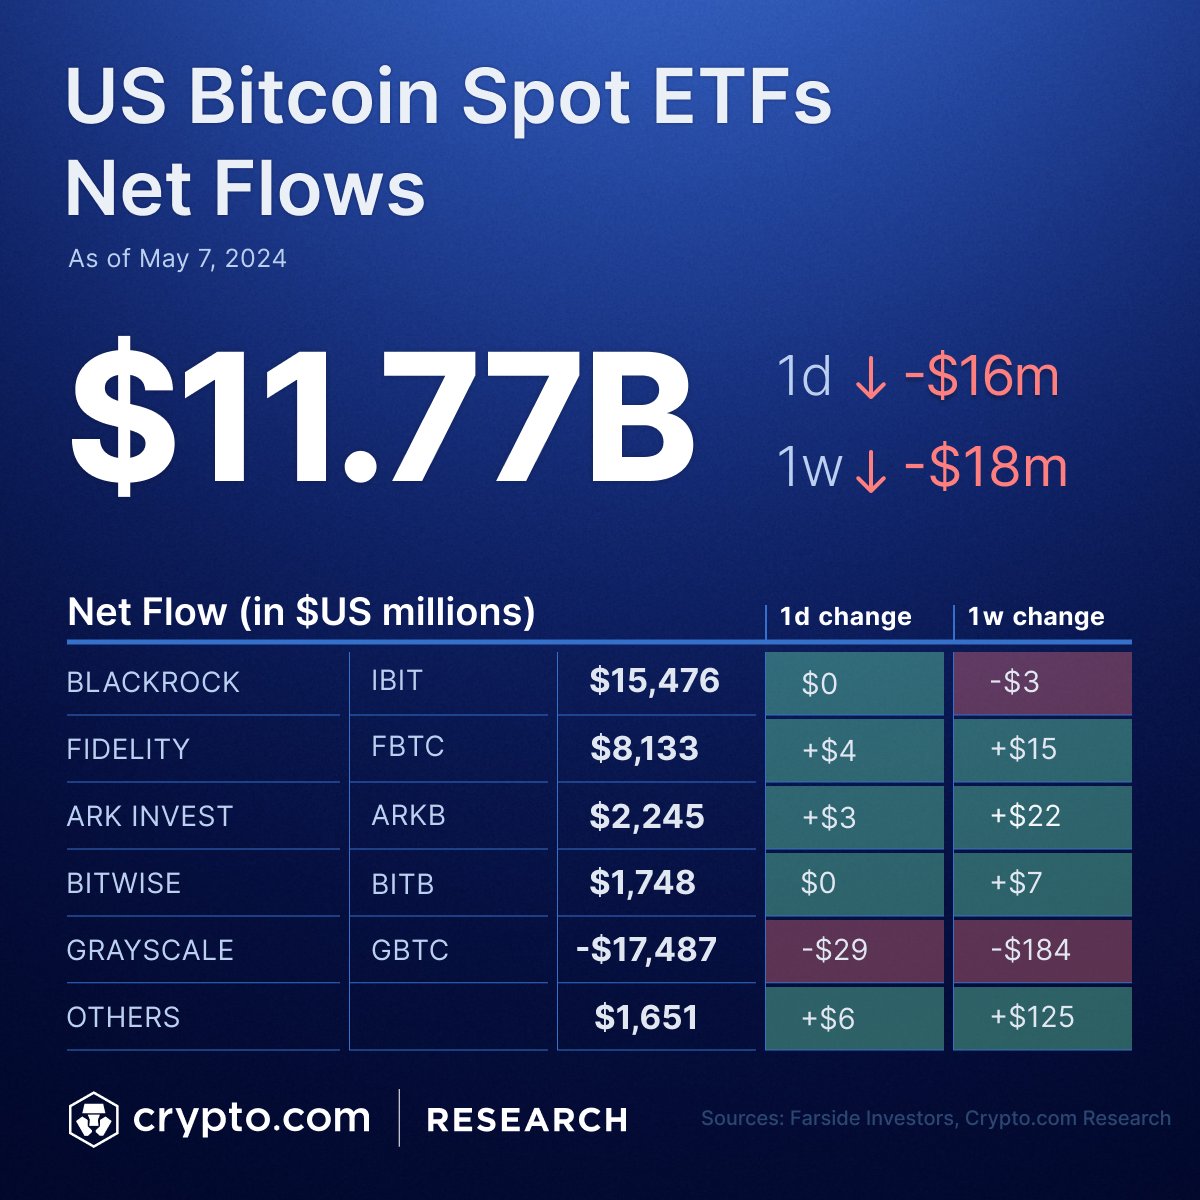 💸 Latest data shows US Spot #Bitcoin ETFs with a total net inflow of $11.77B and a daily net outflow of $16M on 7 May. Blackrock’s IBIT saw zero net inflow and Grayscale’s GBTC resumed its net outflow of $29M after two days of net inflows.